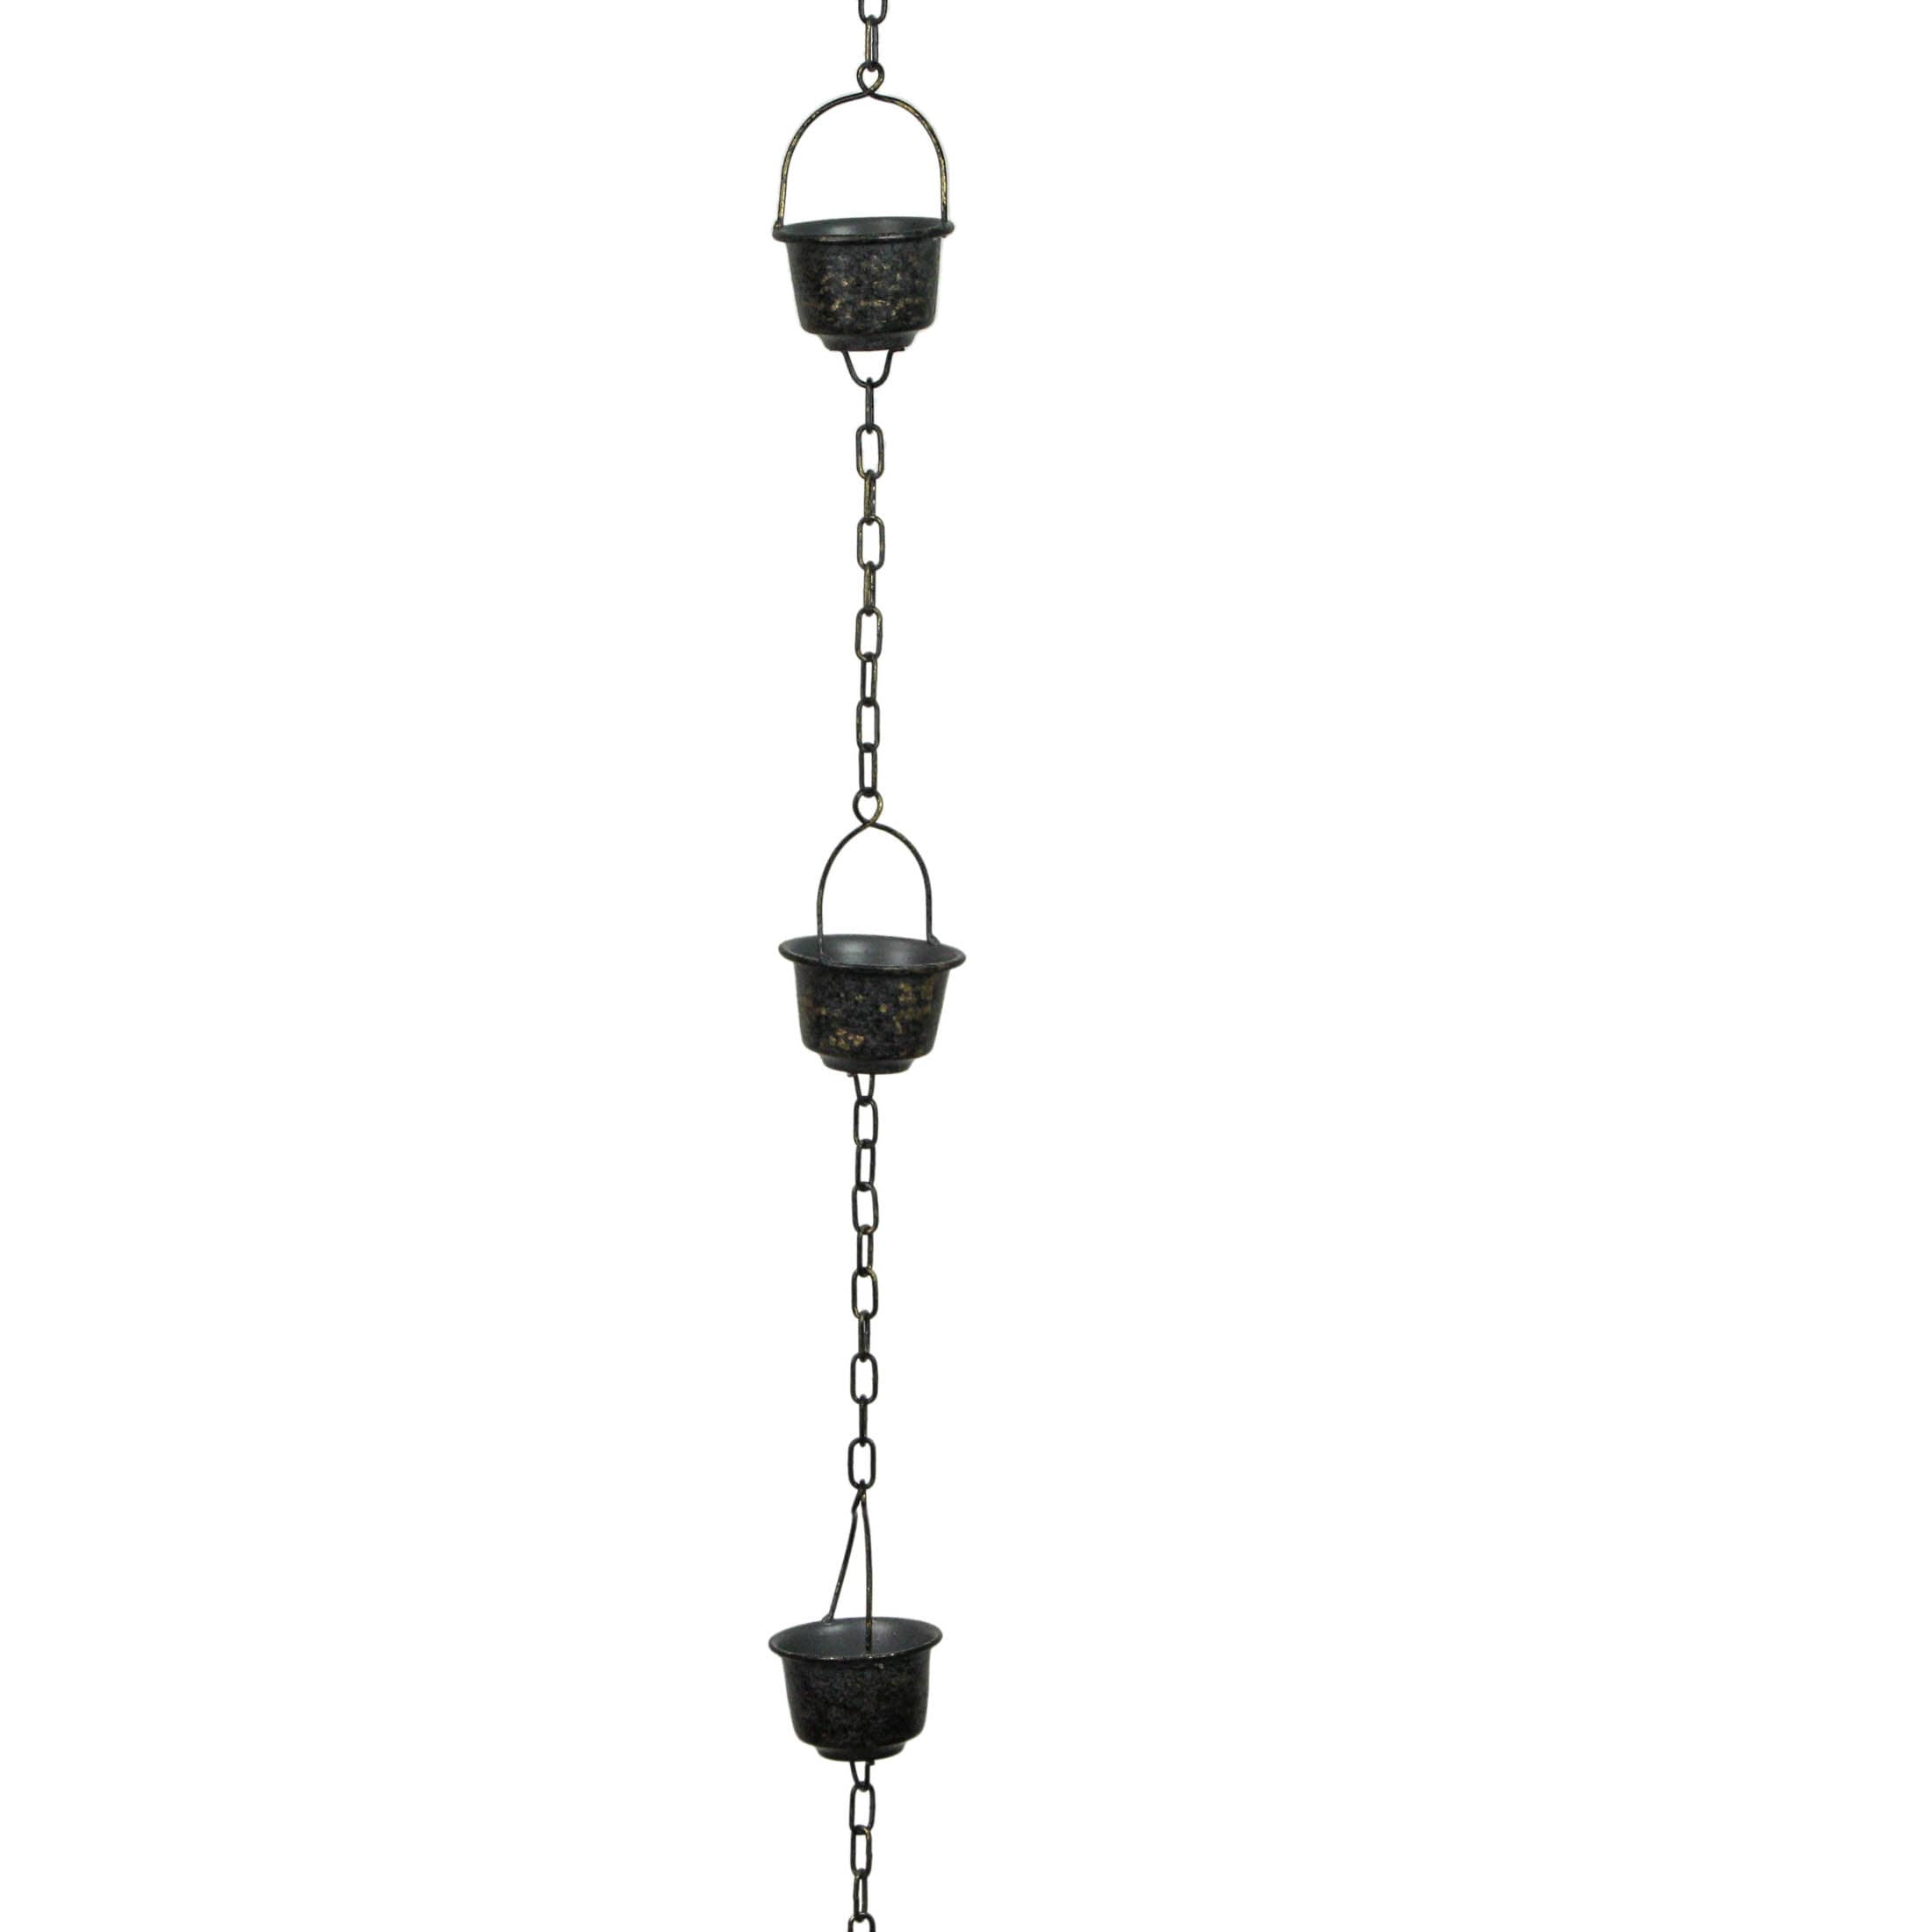 75 Inch Metal Cup  Bird Gutter Downspout Rain Chain Outdoor Decor On  Sale Bed Bath  Beyond 37560144